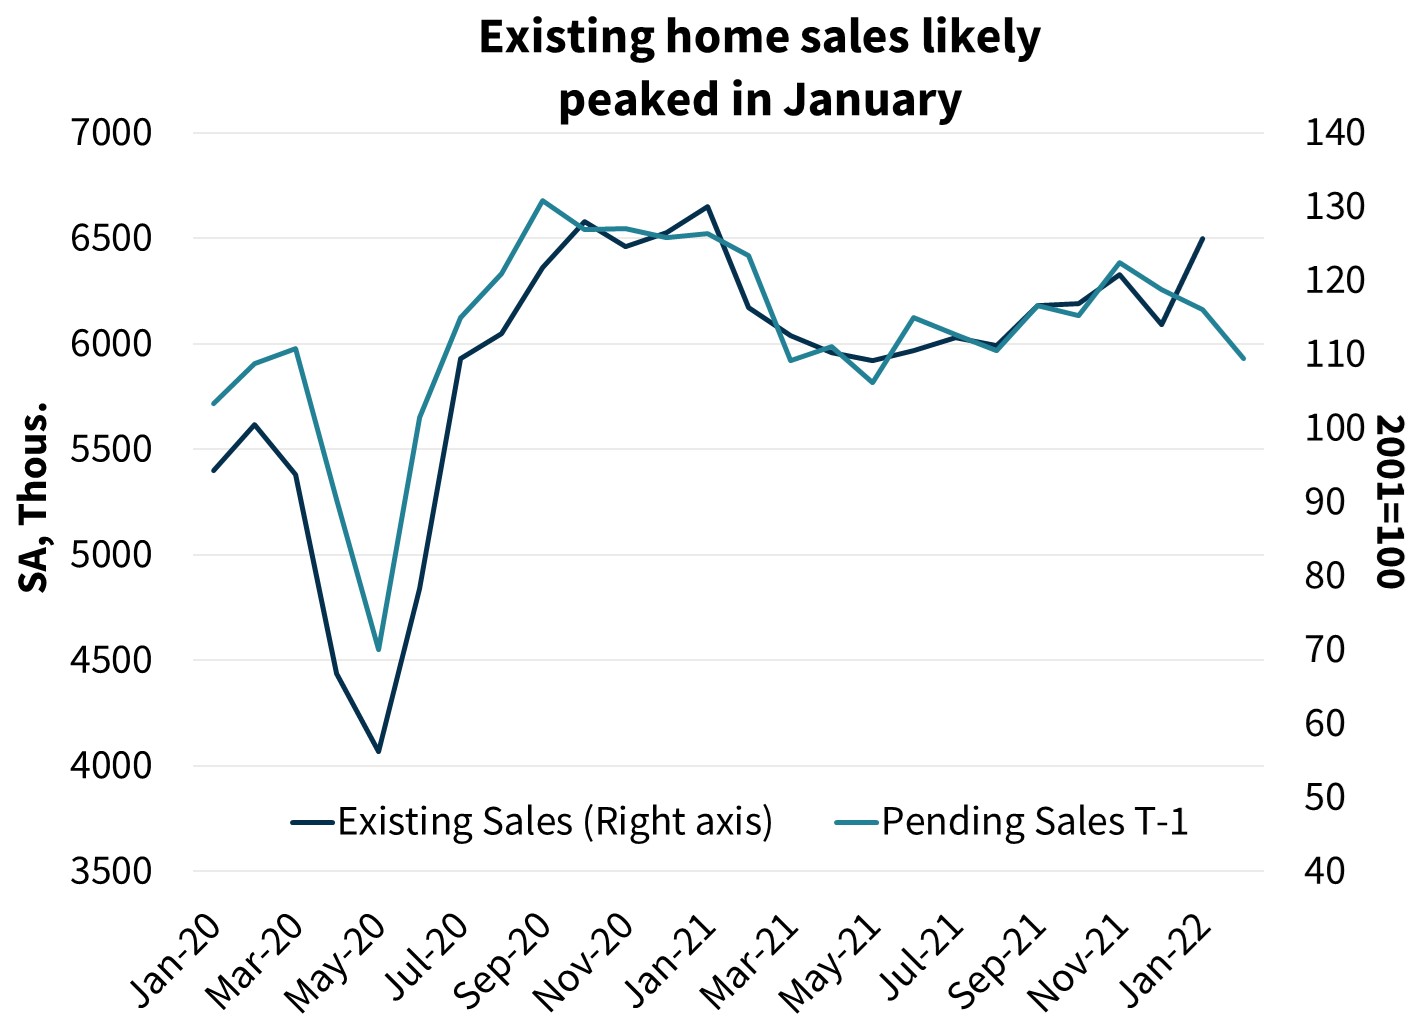  Existing home sales likely peaked in January